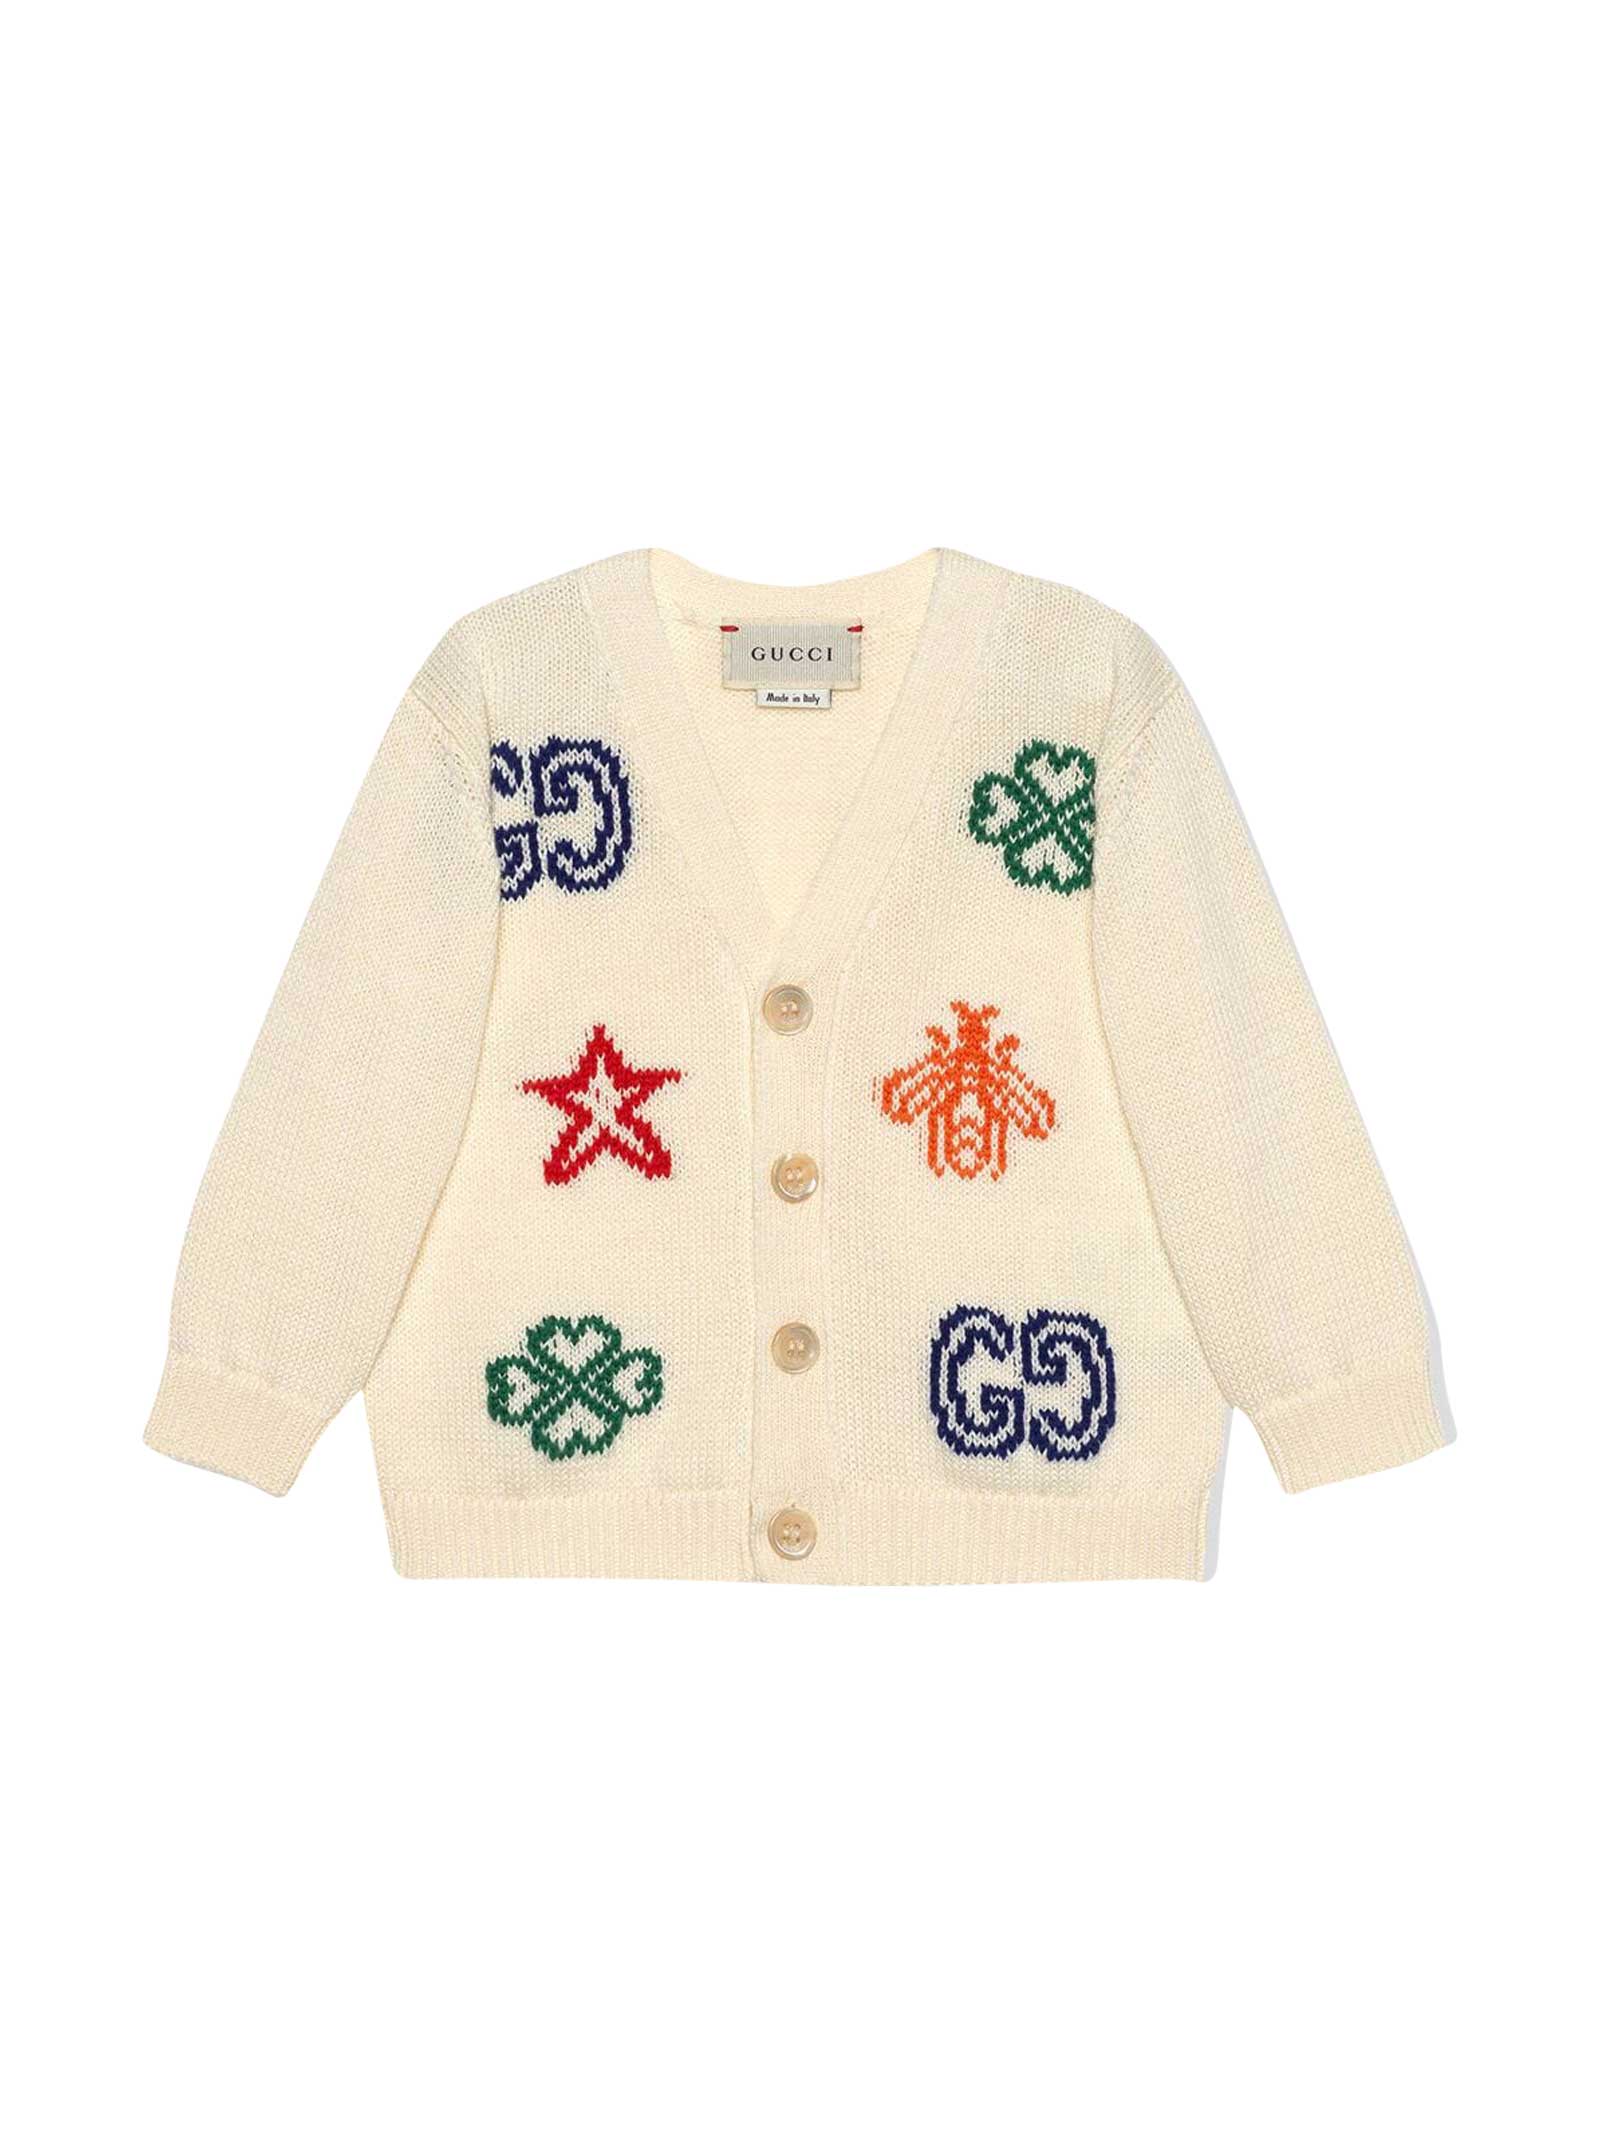 GUCCI WHITE CARDIGAN WITH MULTICOLOR PRINT YOUNG VERSACE,639457XKBMX 9061